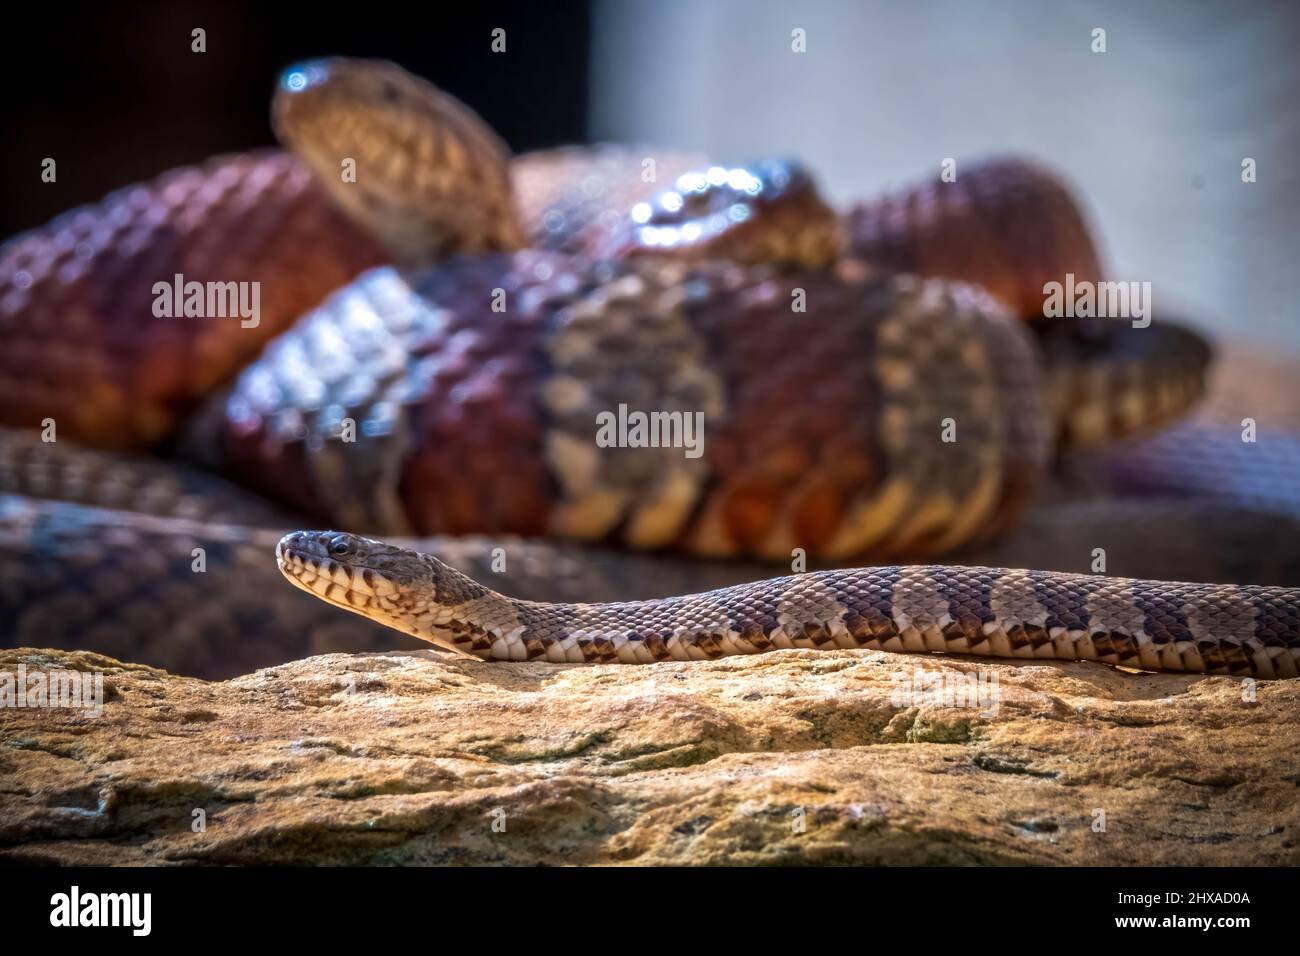 A baby Northern Watersnake(Nerodia, sipedon) suns all by itself as the older snakes form a mating ball or breeding ball in the background as spring ap Stock Photo